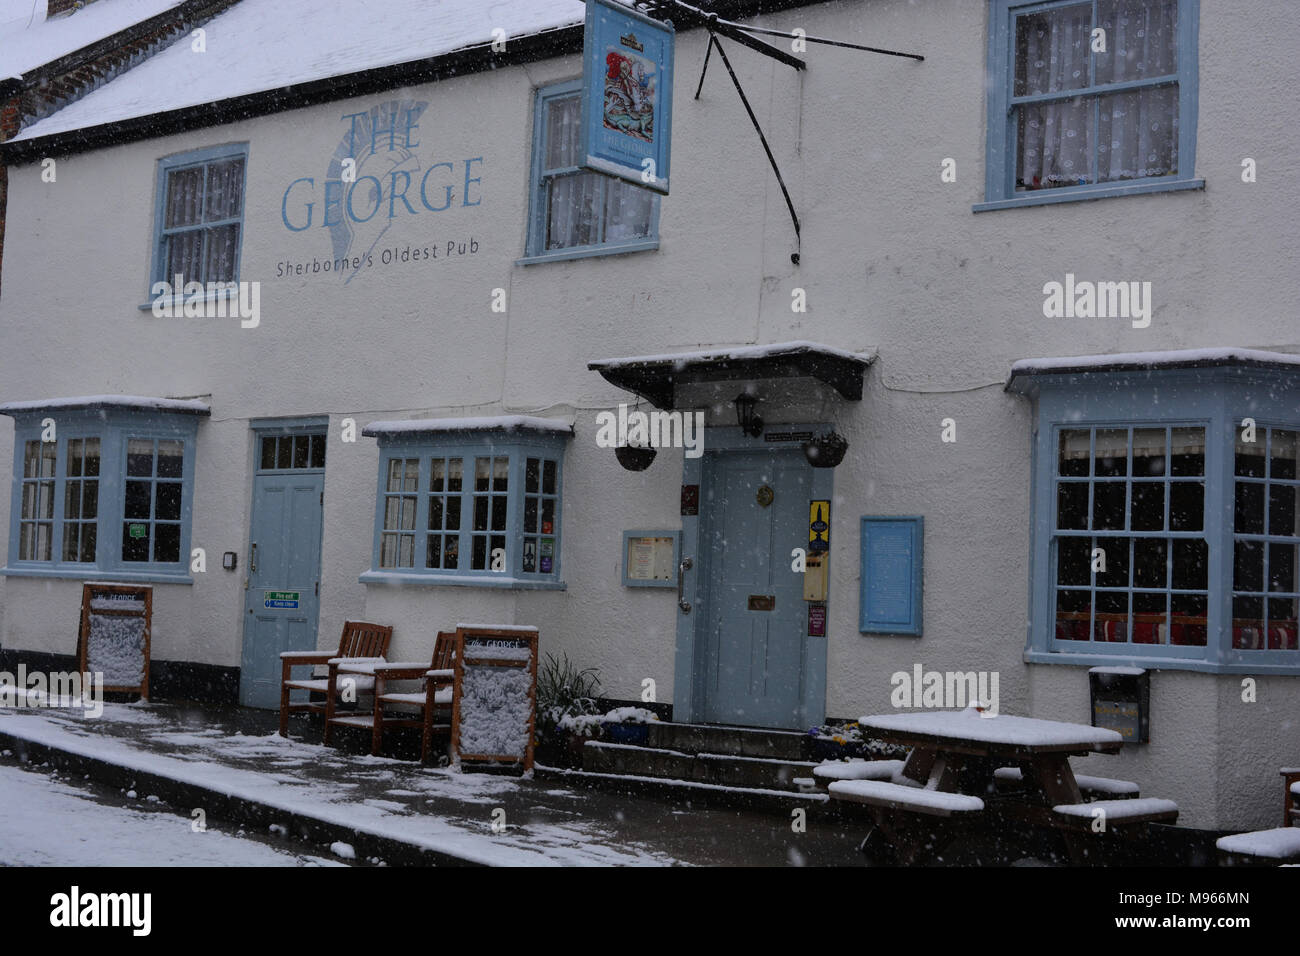 The George in the historic market town If Sherborne, Dorset during the so-called mini Beast from the East snowstorm, March 2018. Stock Photo